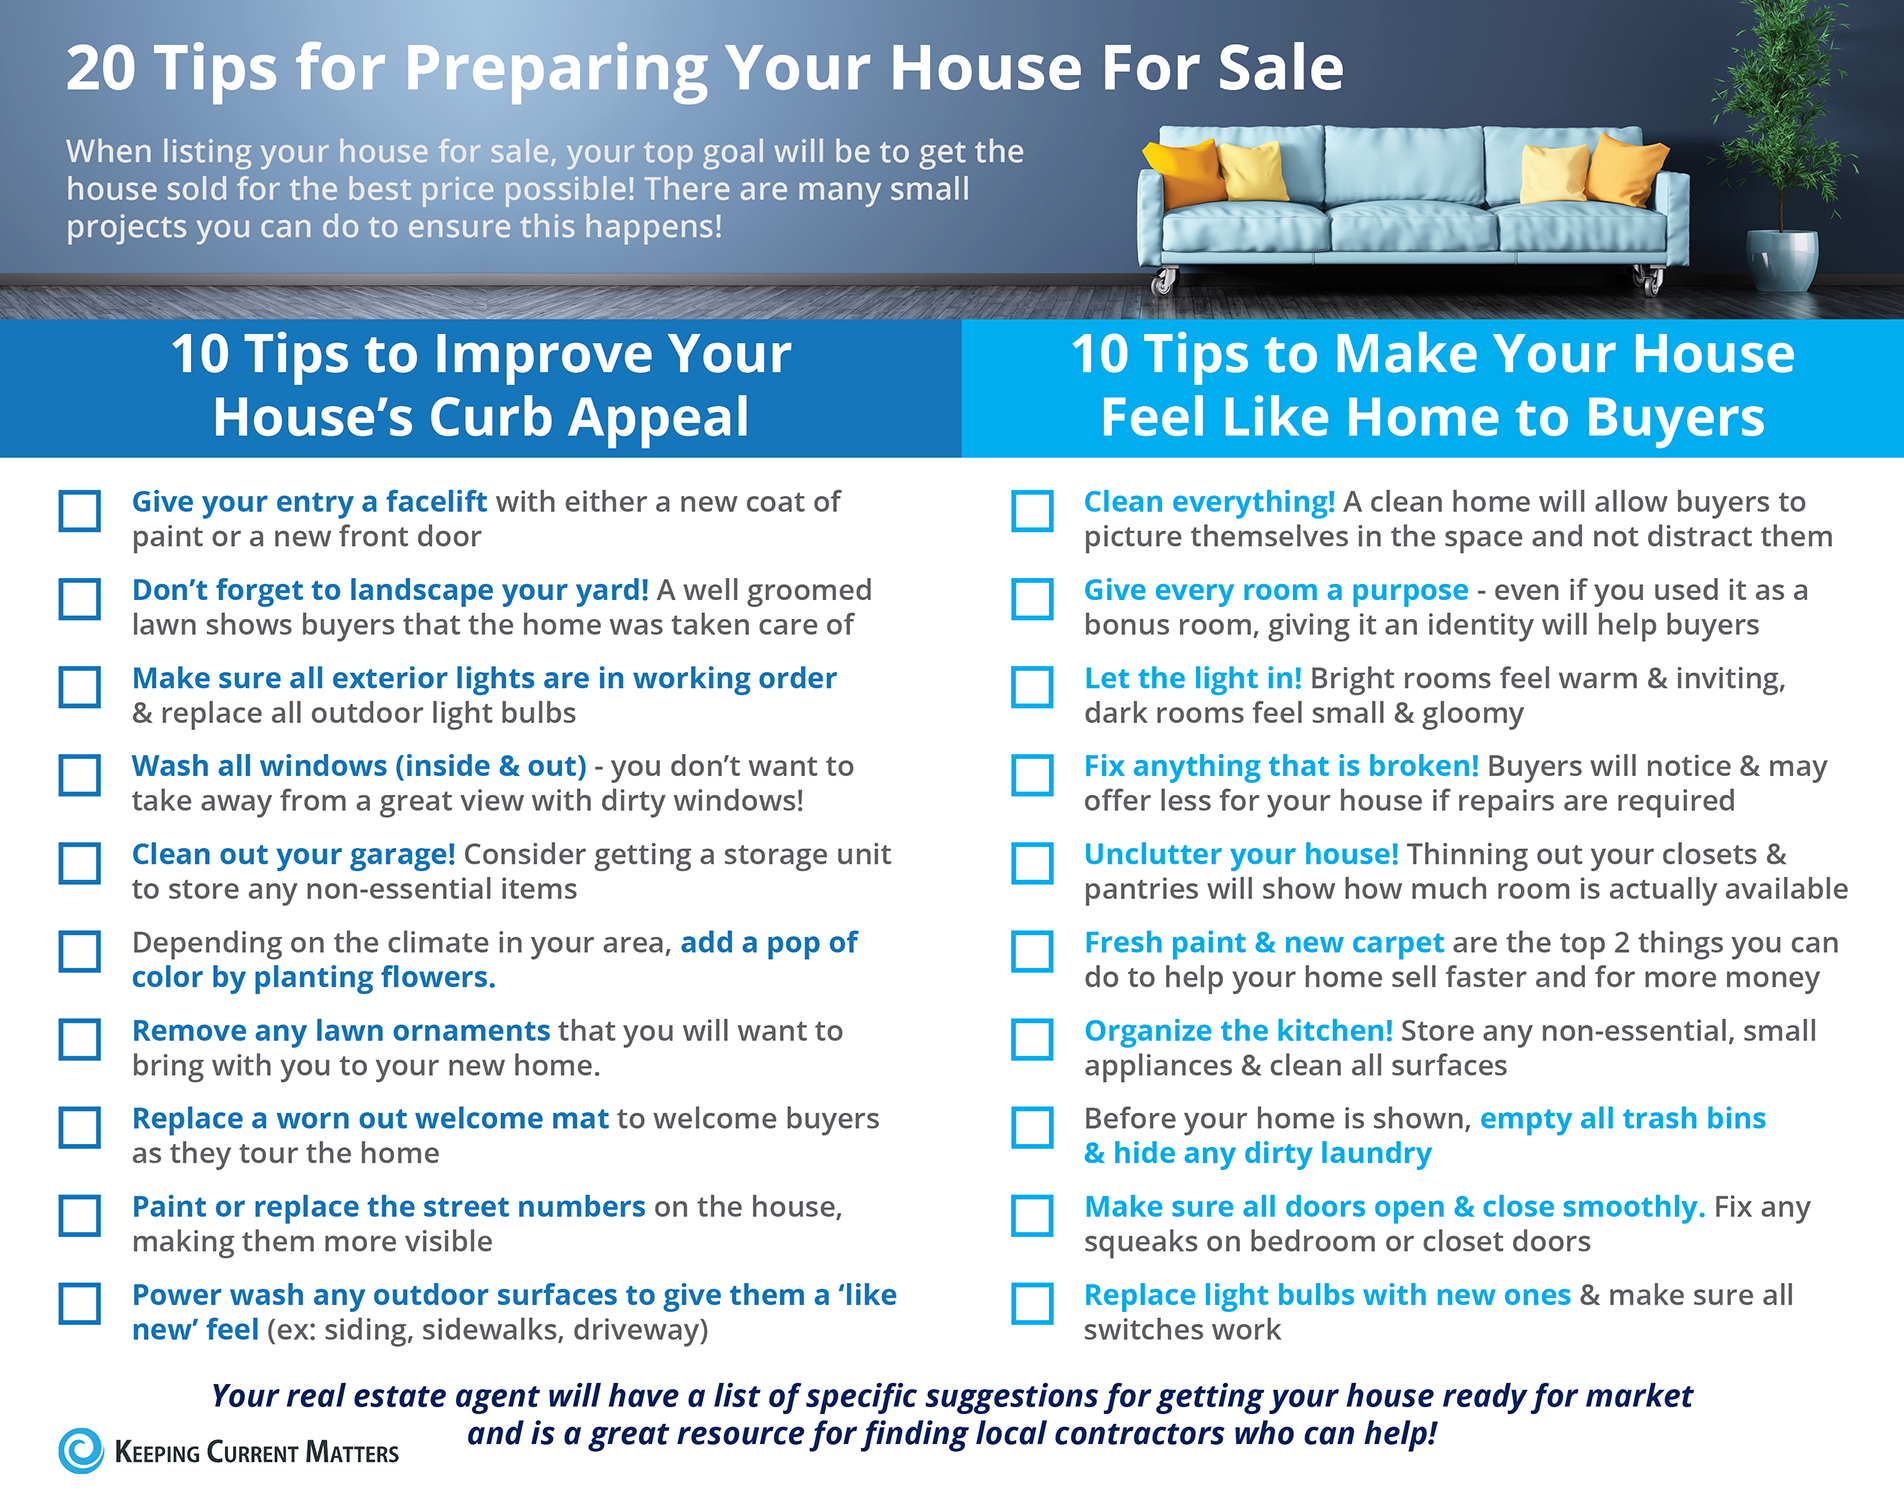 20 Tips for Preparing Your House for Sale This Fall [INFOGRAPHIC] | Keeping Current Matters